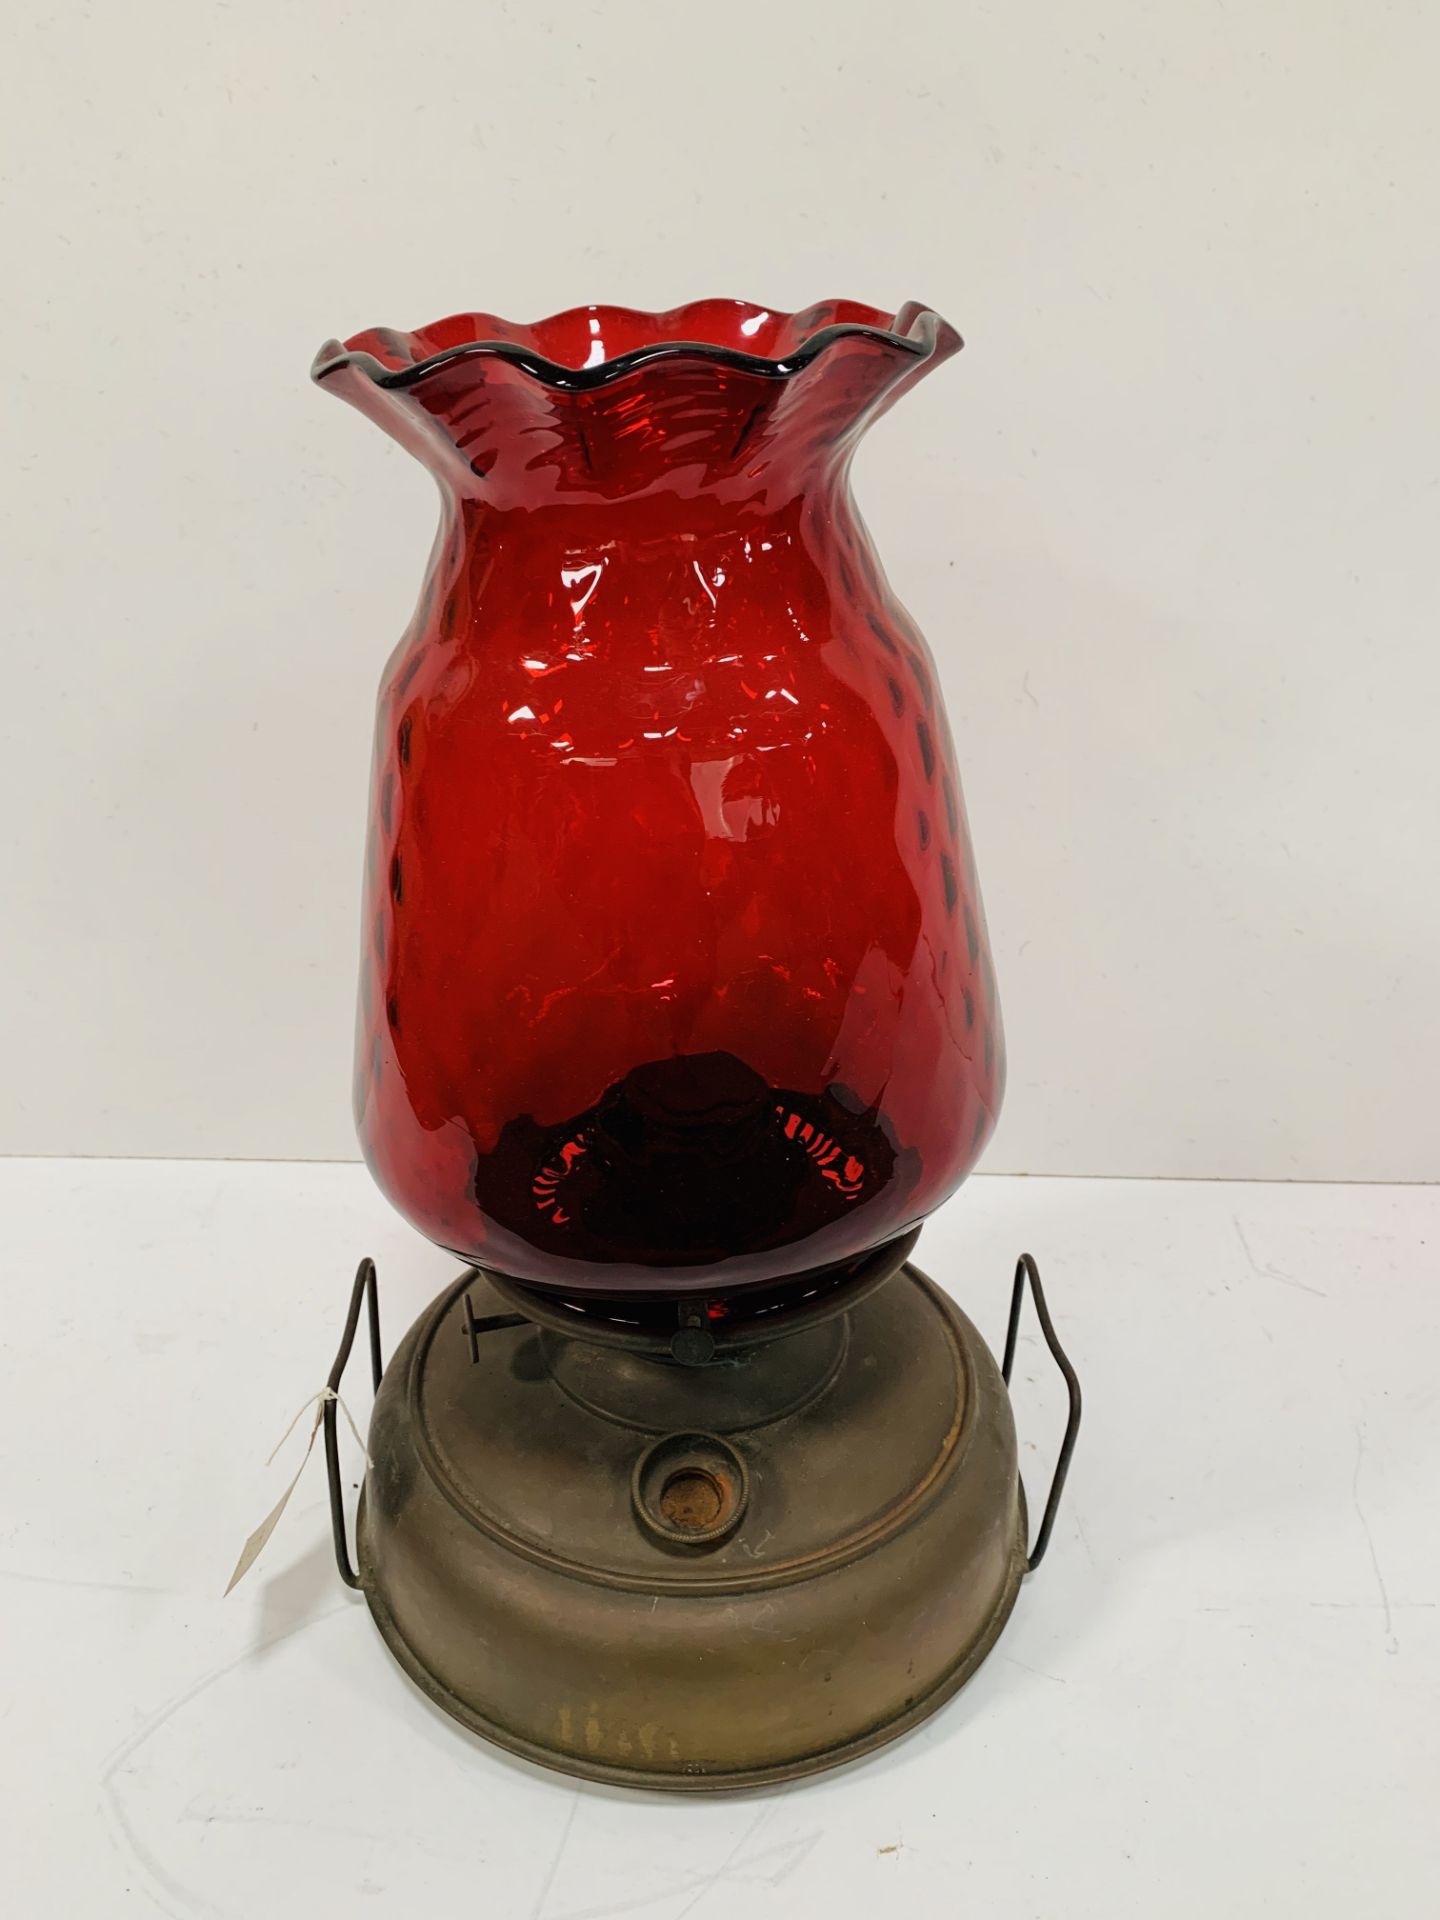 A paraffin lamp with ruby glass shade.